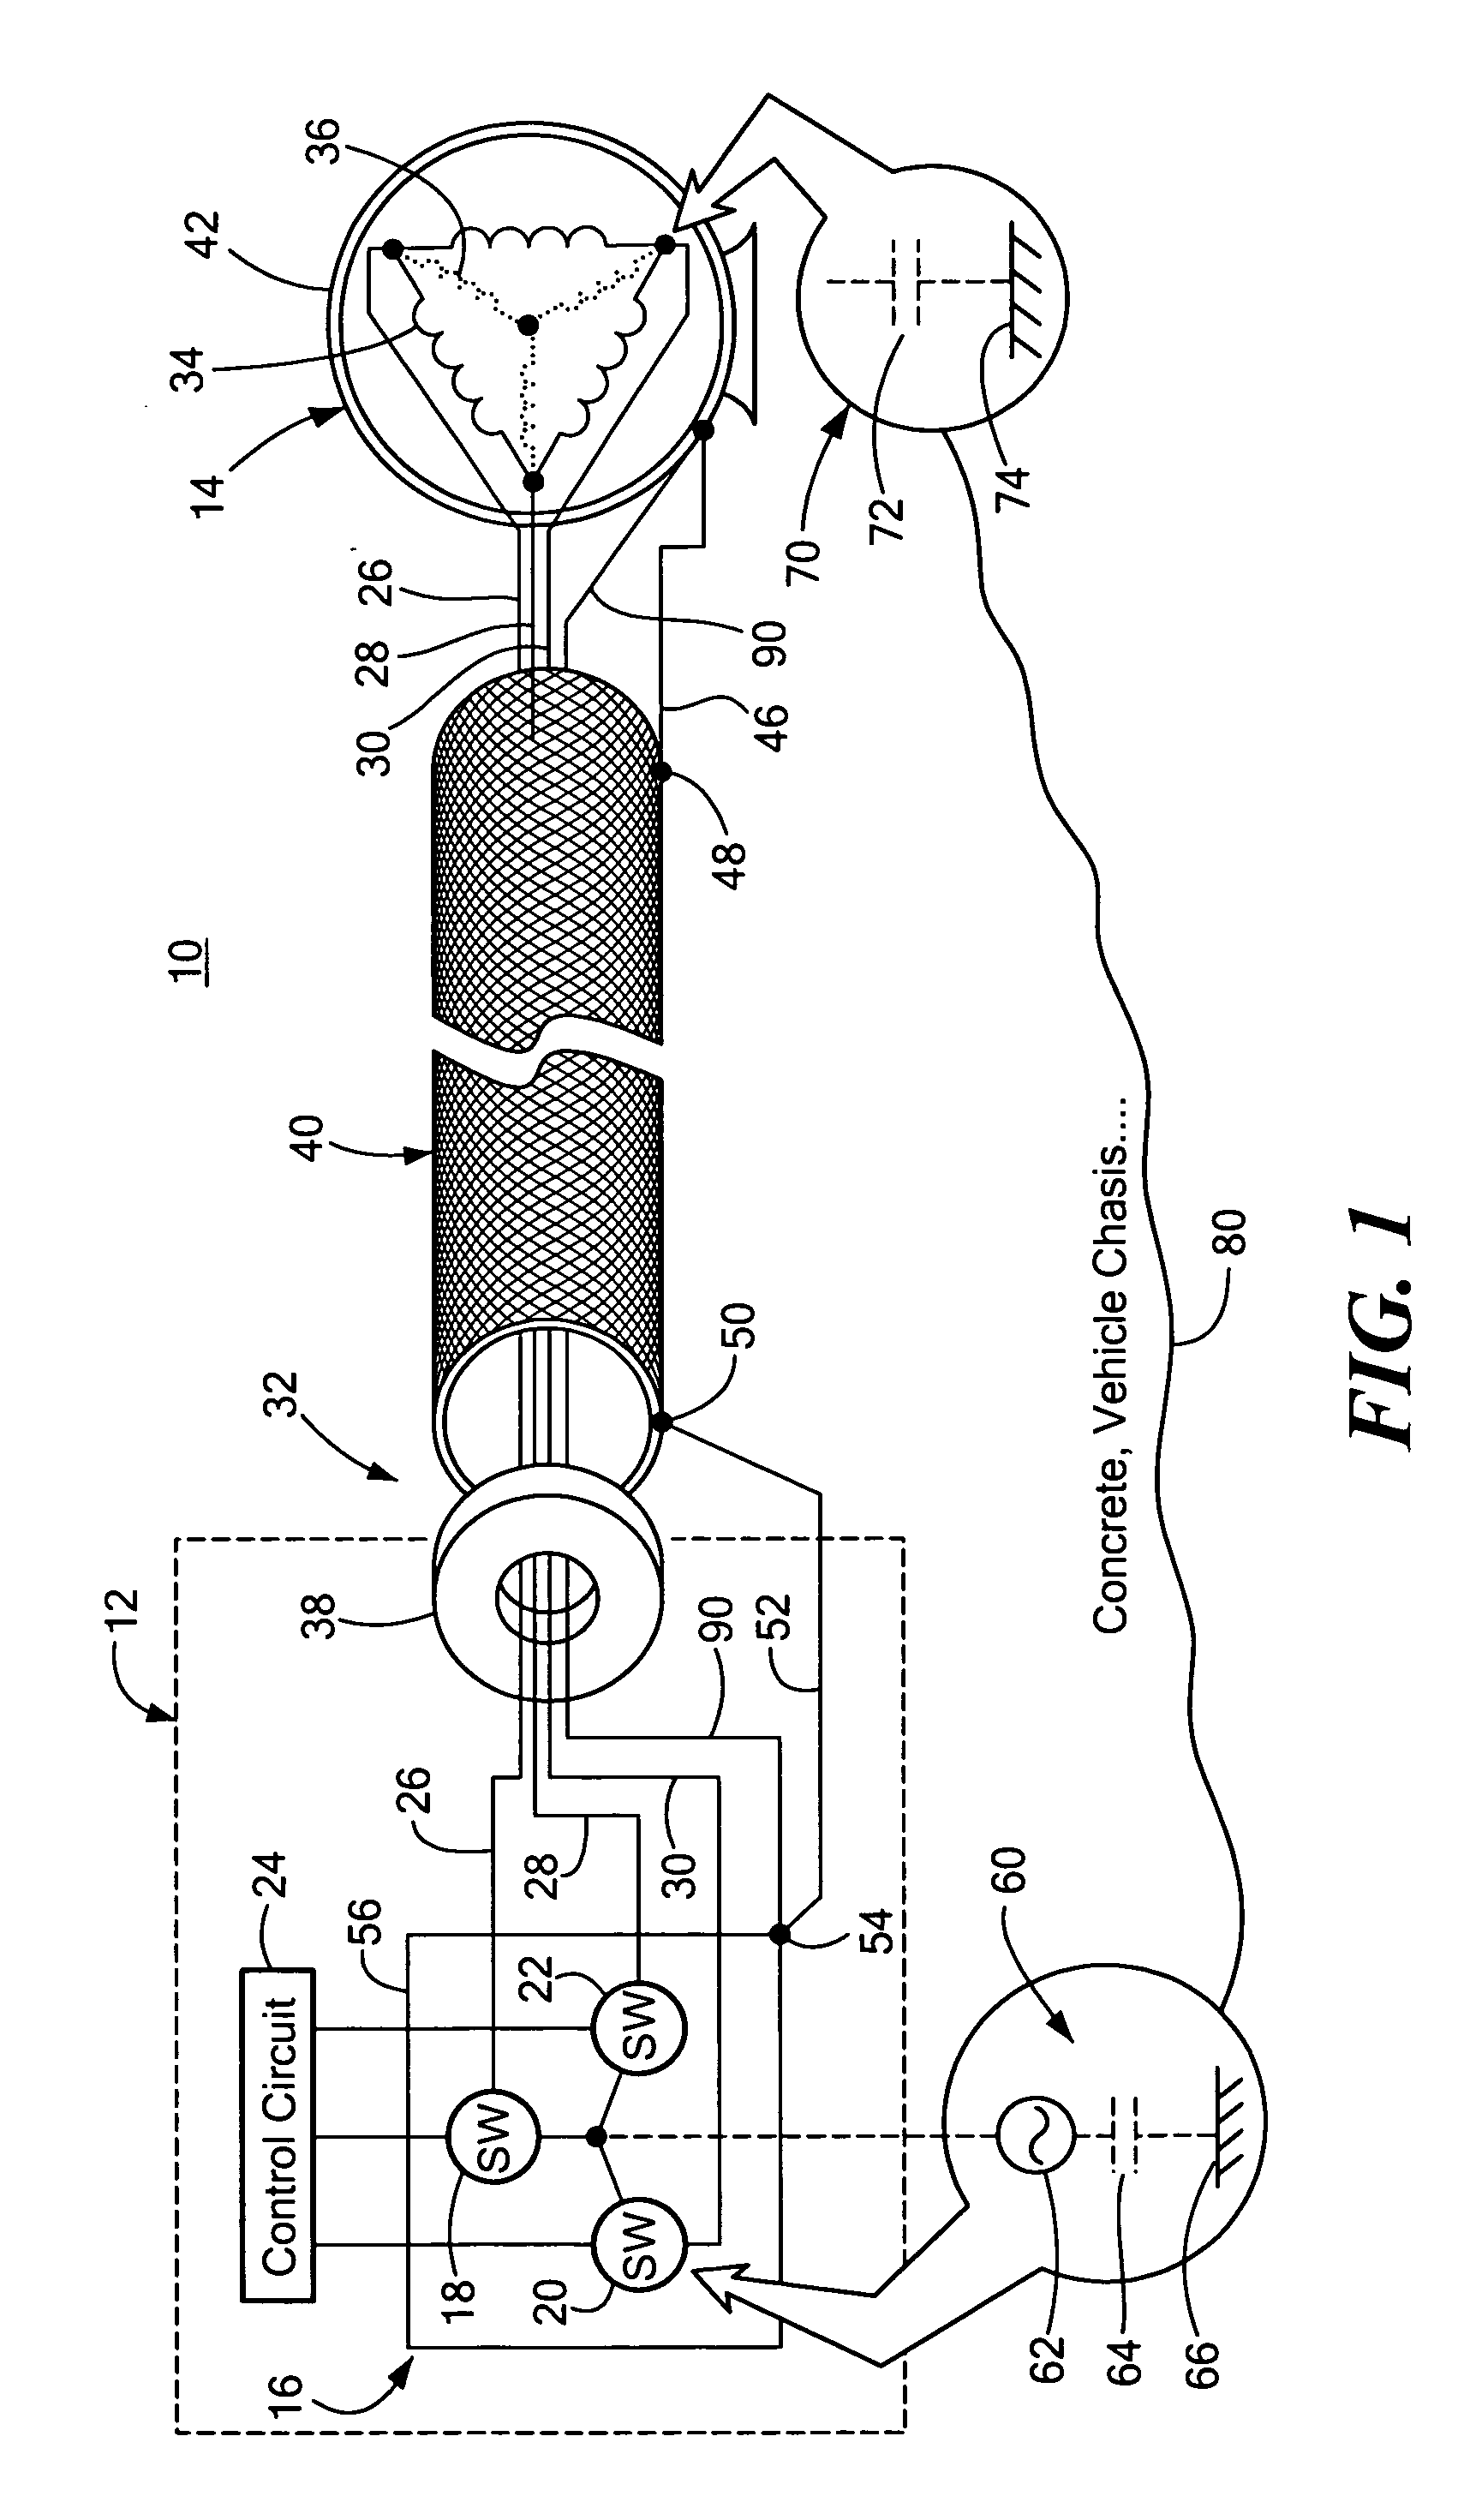 RFI/EMI filter for variable frequency motor drive system